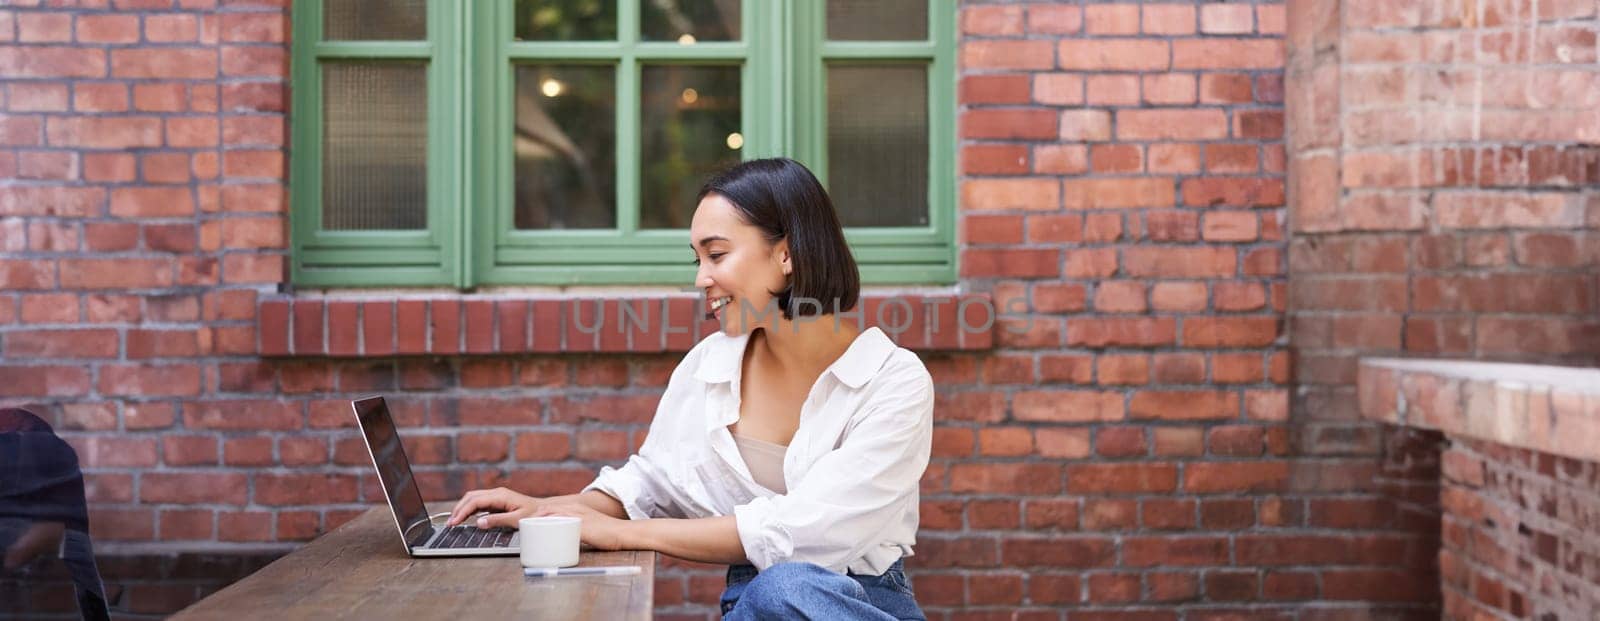 Portrait of young stylish woman, influencer sitting in cafe with cup of coffee and laptop, smiling and looking confident.